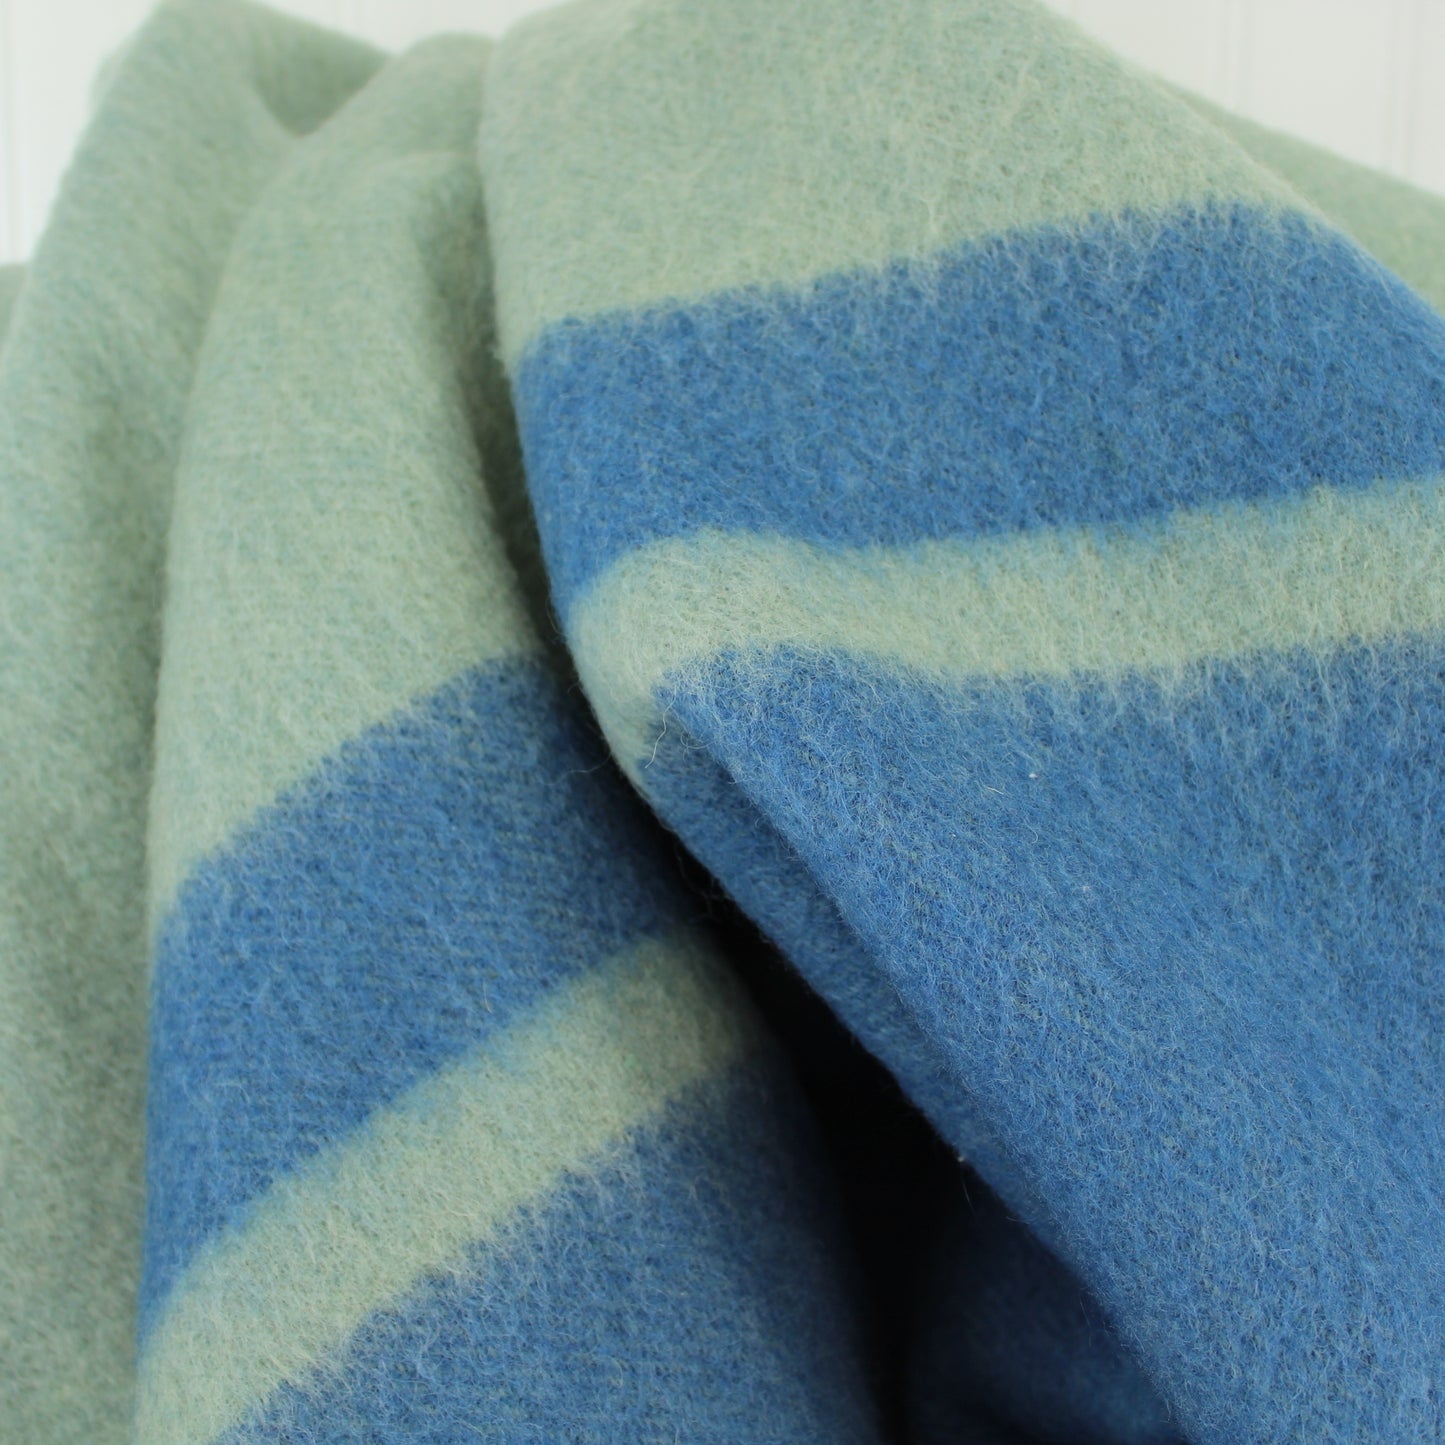 Large Chatham Wool Blanket Heavy Weight Shades of Blue 74" X 92" good nap heavy weight